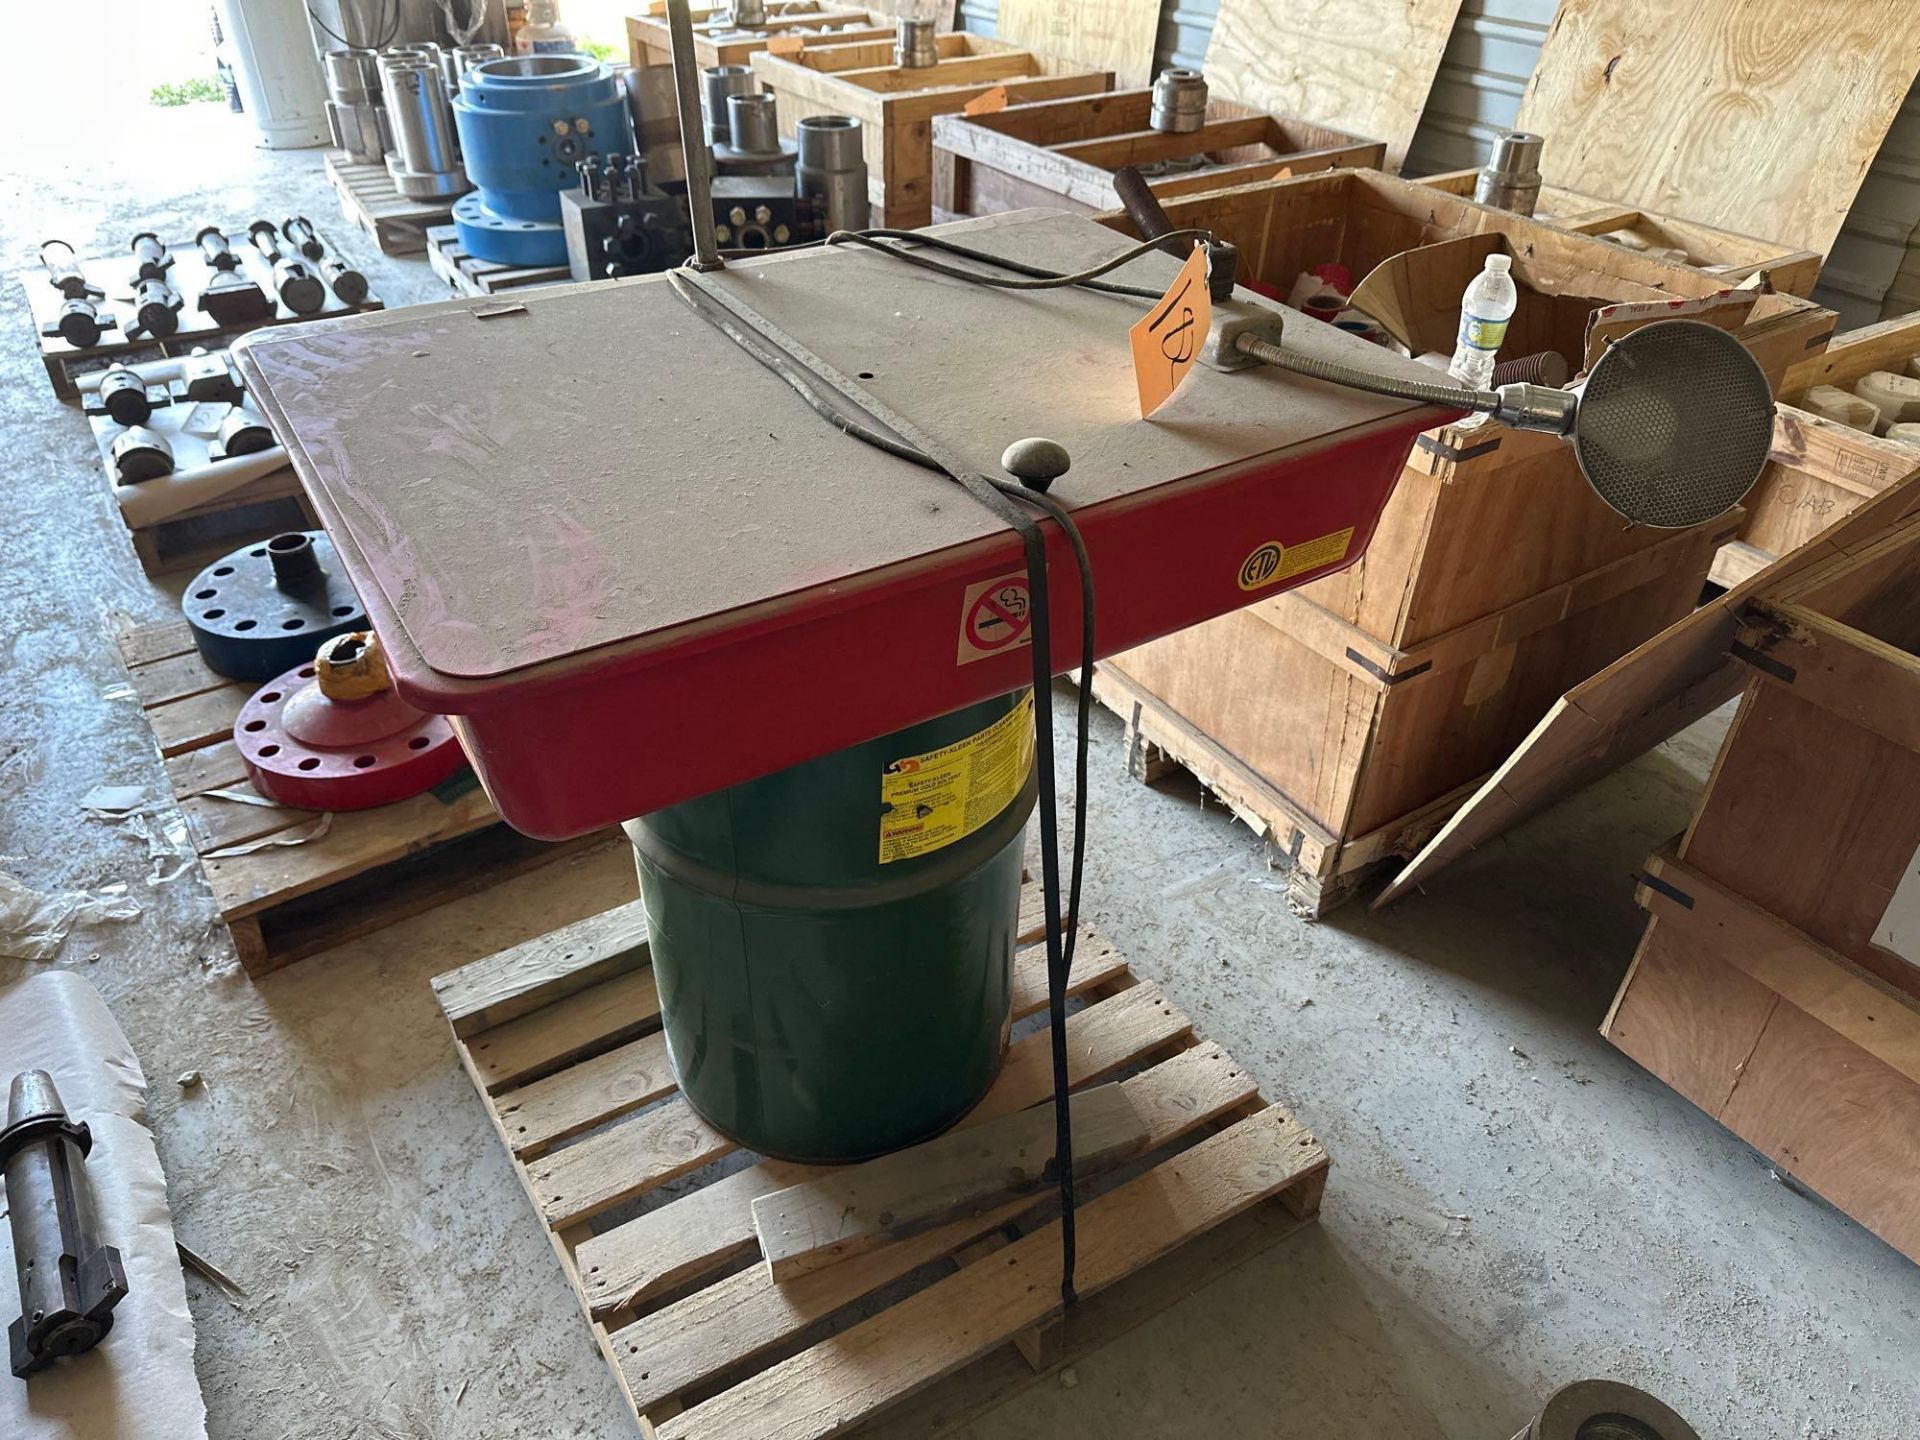 Parts washer with Metal Drum and light 36” X 24” X 7” Deep